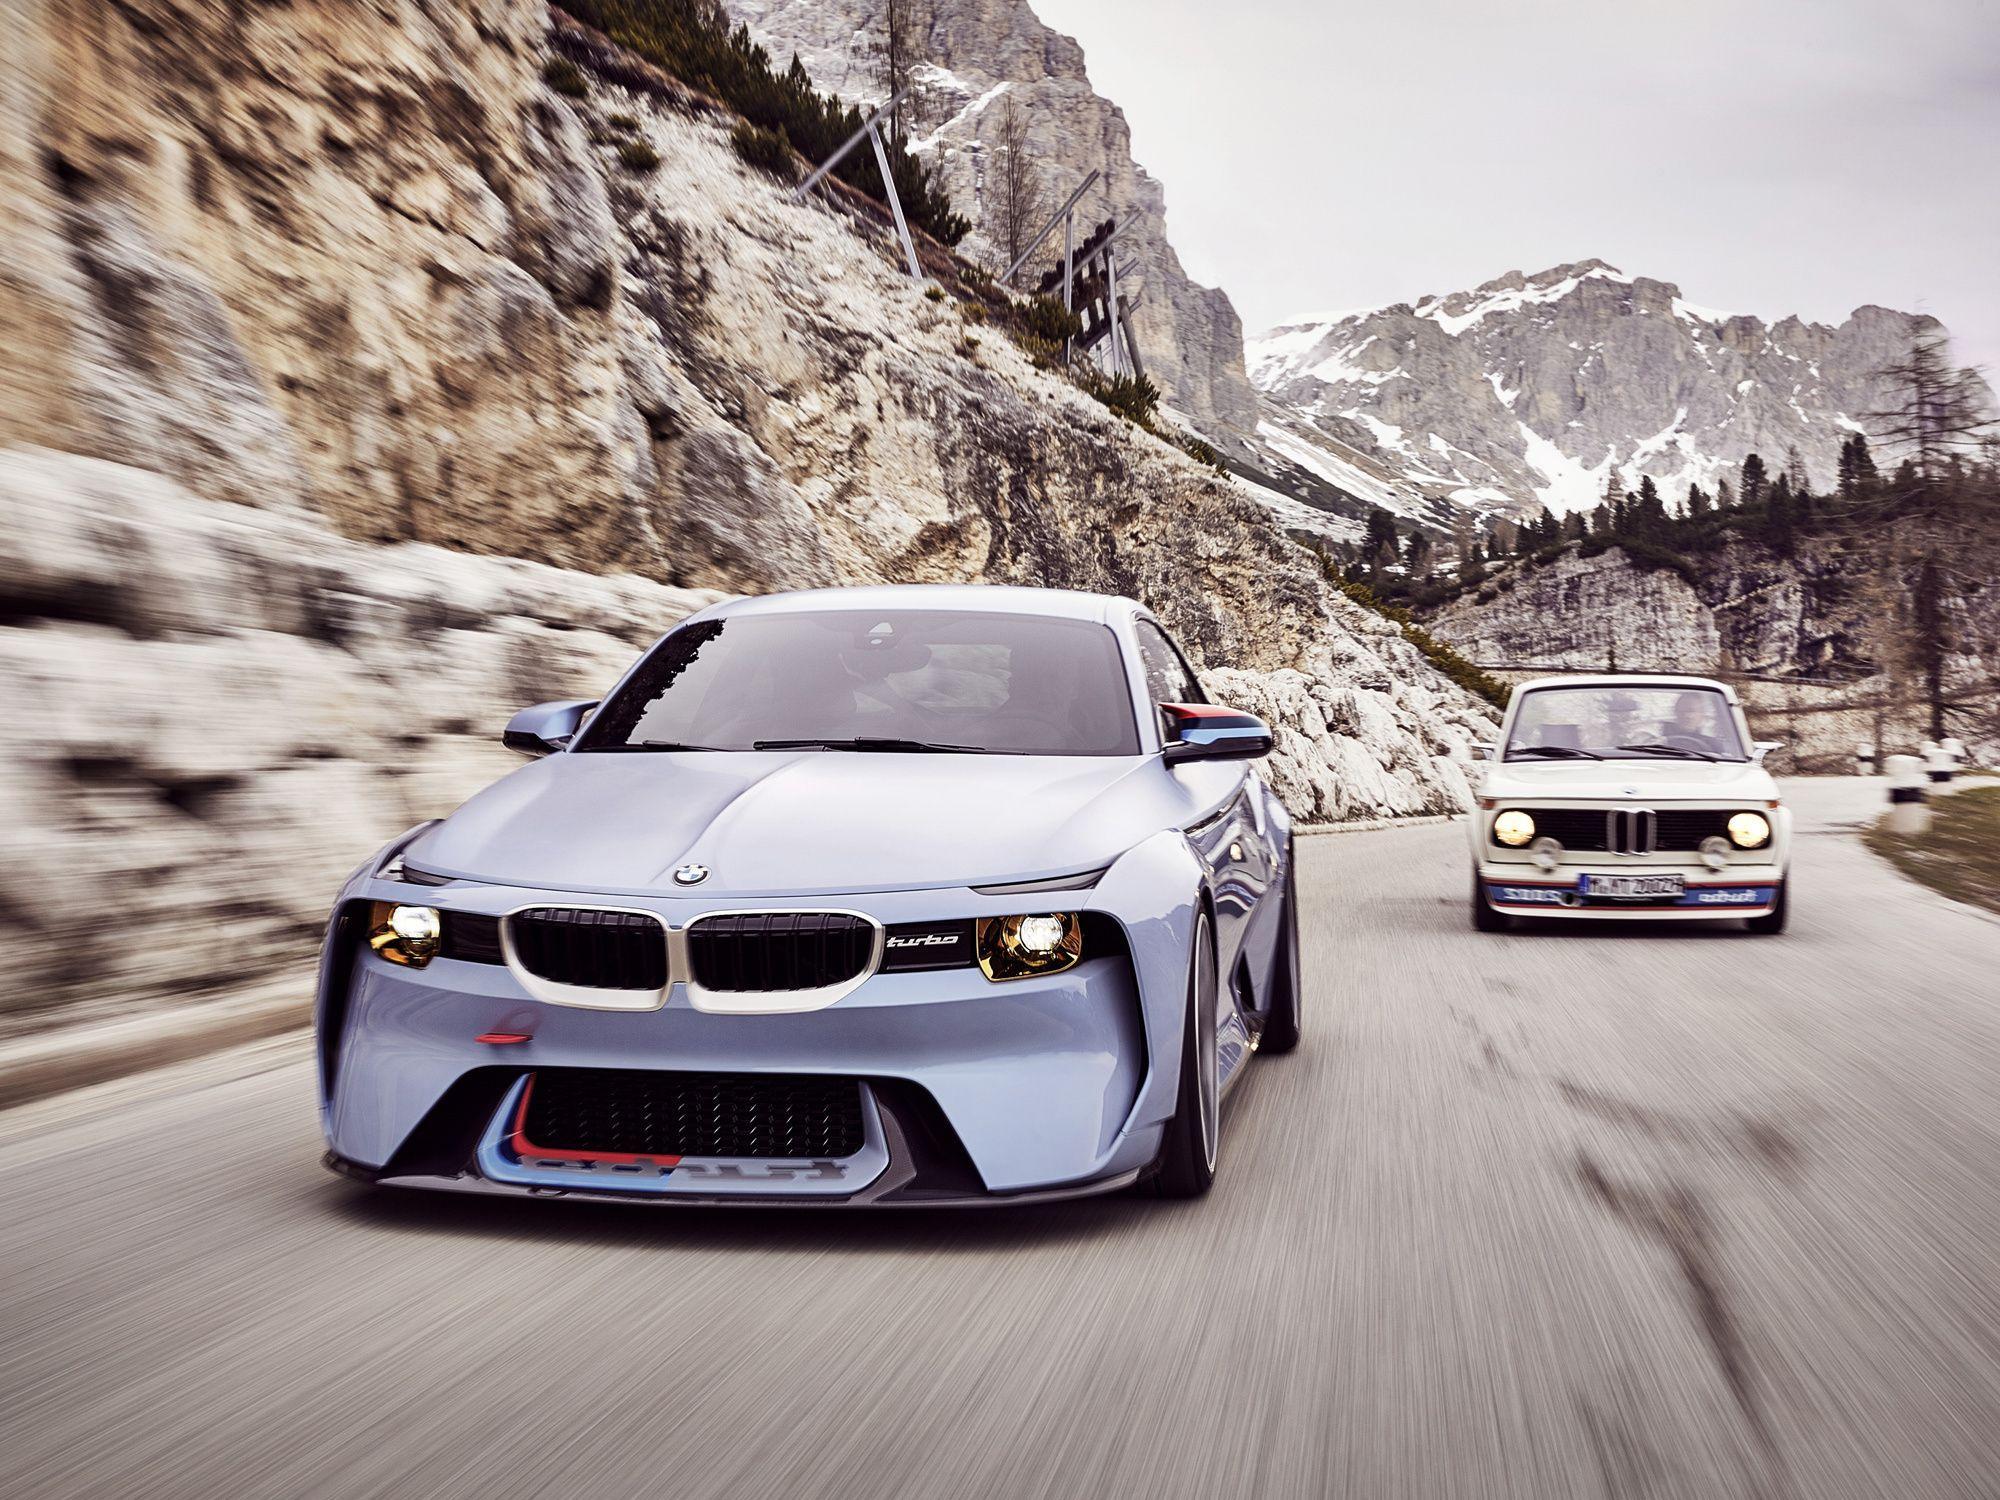 BMW 2002 Hommage Wallpaper Image Photo Picture Background